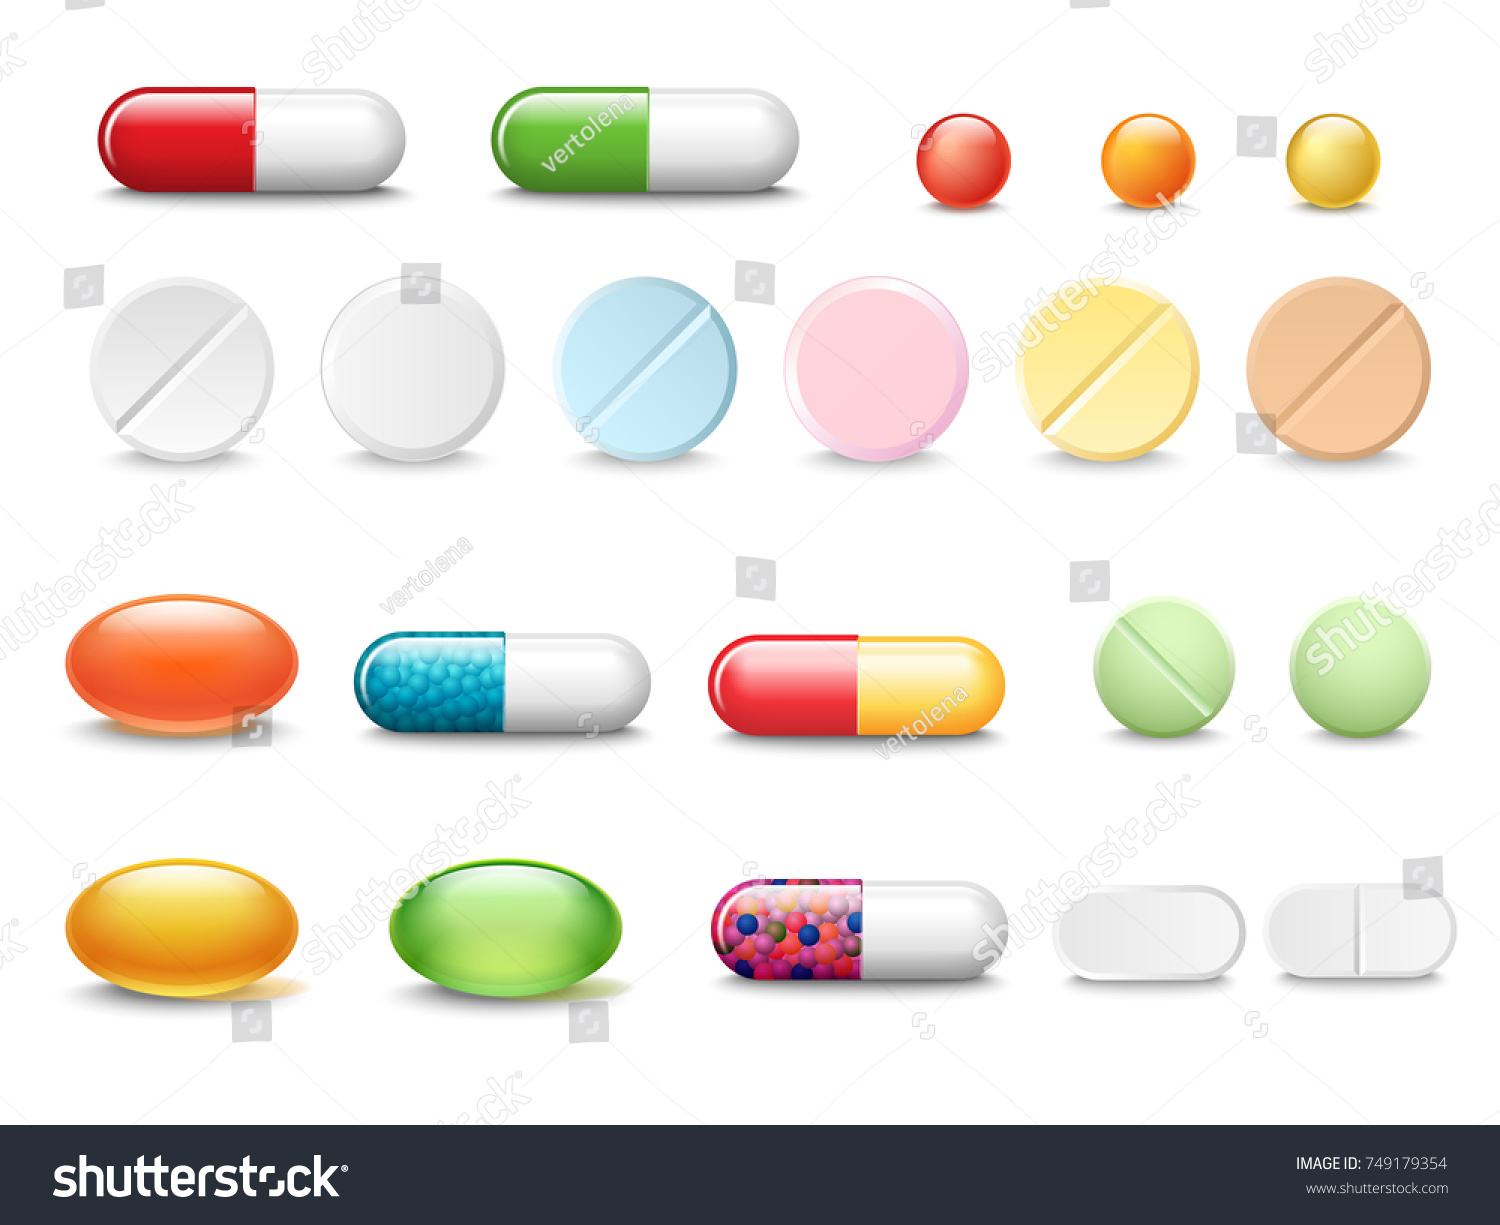 Set of vector realistic pills and capsules isolated on white background. Medicines, tablets, capsules, drug of painkillers, antibiotics, vitamins. Healthcare medical and vector illustration. #749179354